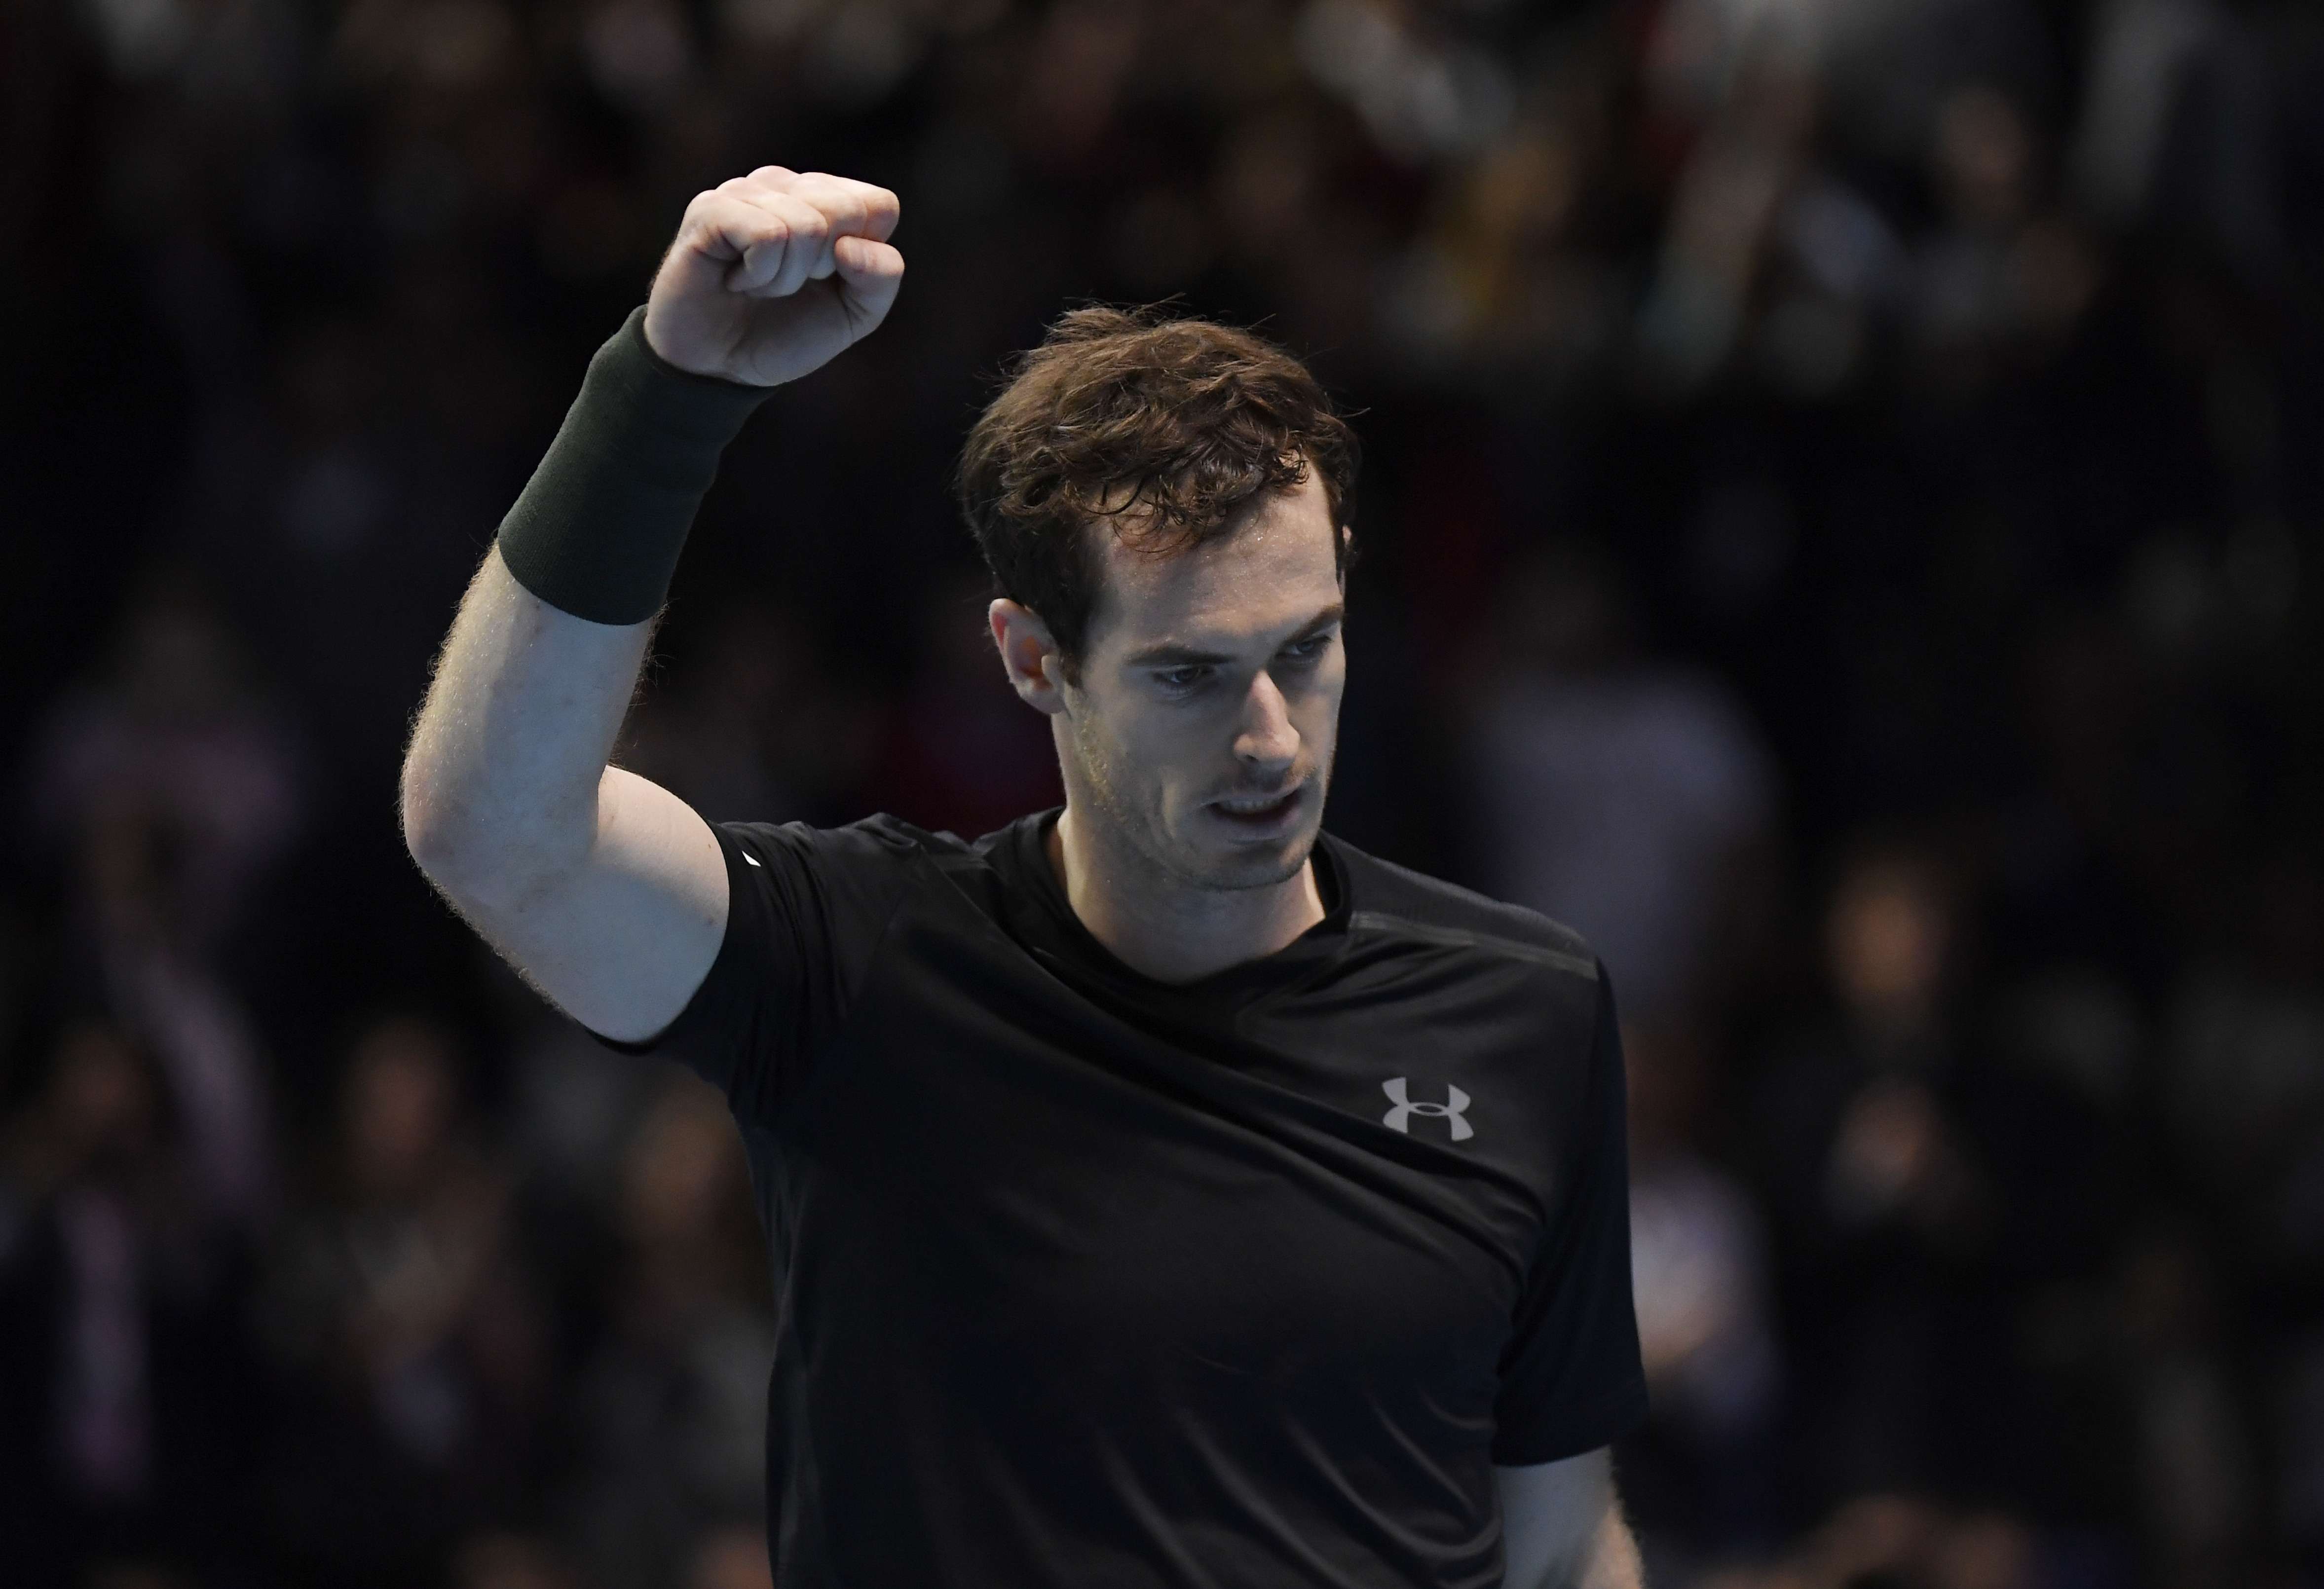 Andy Murray celebrates beating Stan Wawrinka to qualify for the semi-finals of the ATP Tour Finals event in London. Photo: Reuters